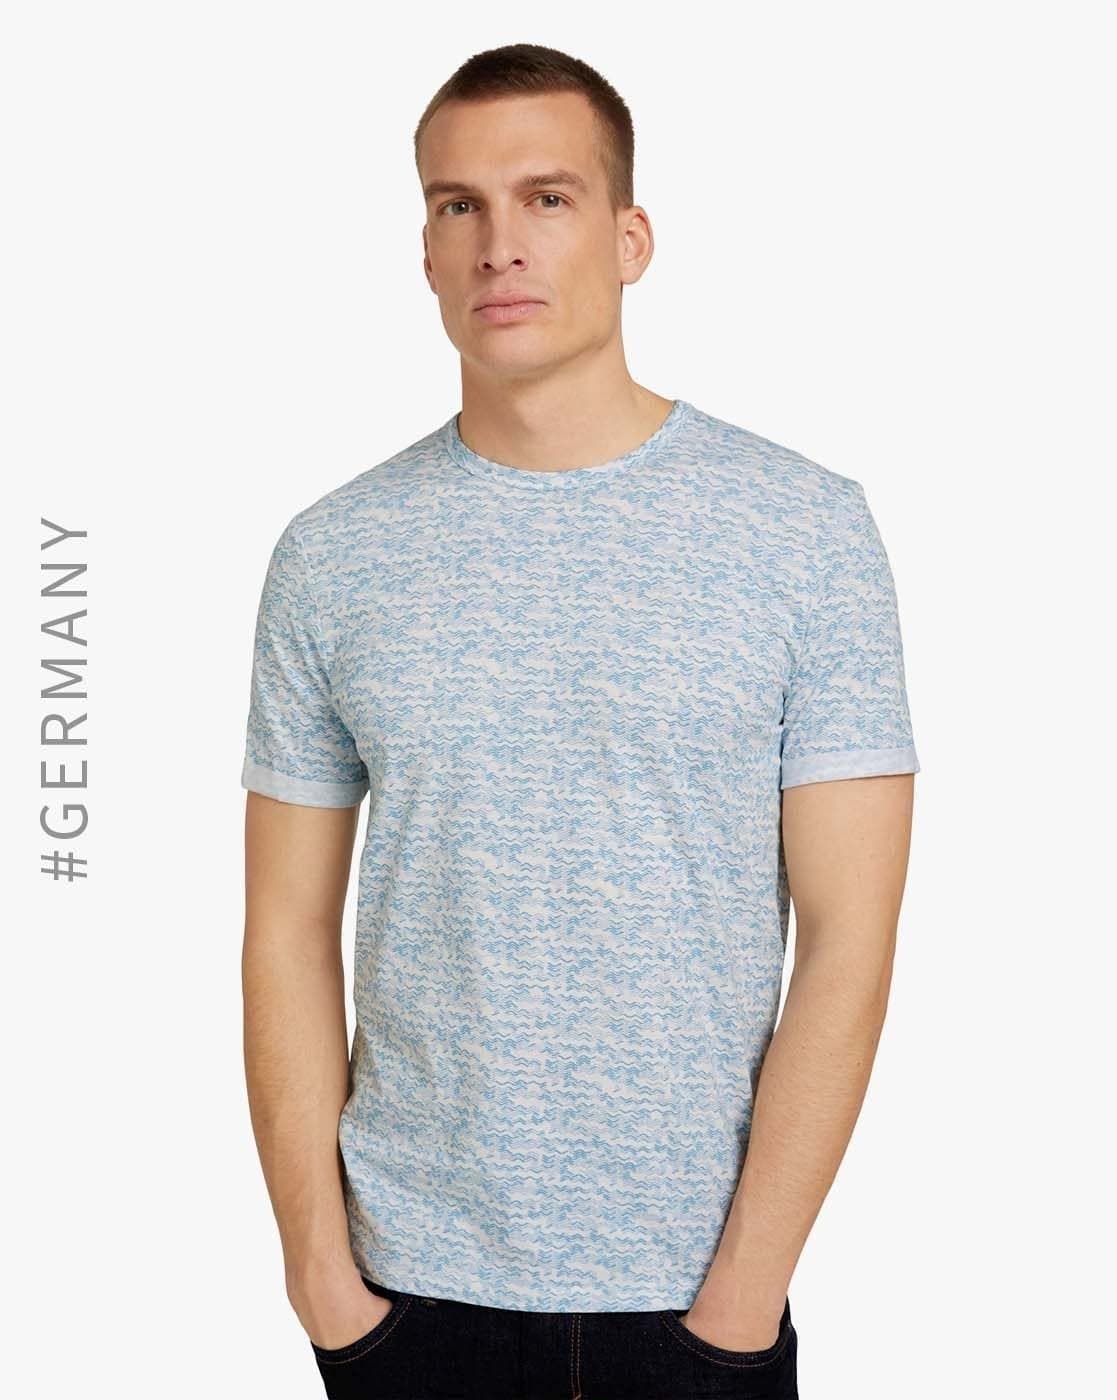 Buy Blue Tshirts for Men Tom by Tailor Online